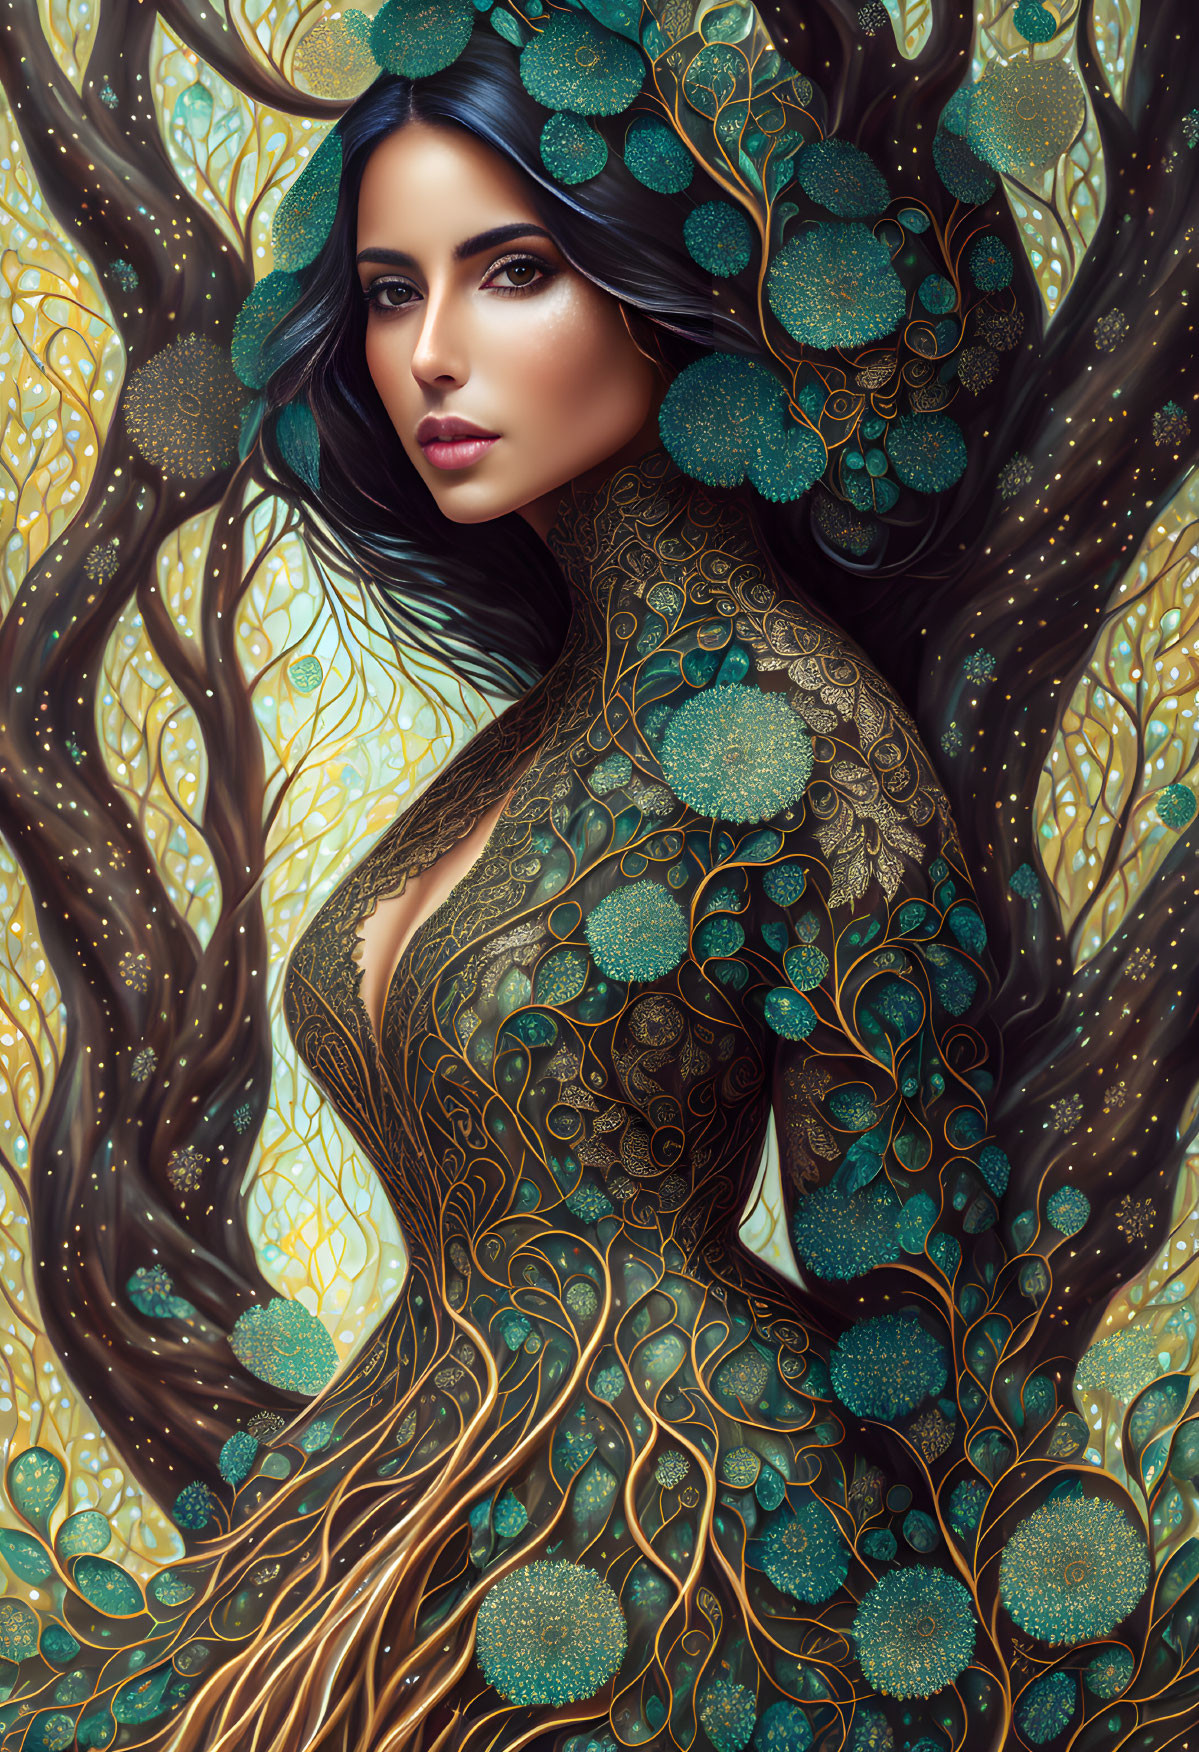 Dark-Haired Woman Blended into Tree Pattern with Golden and Turquoise Leaves